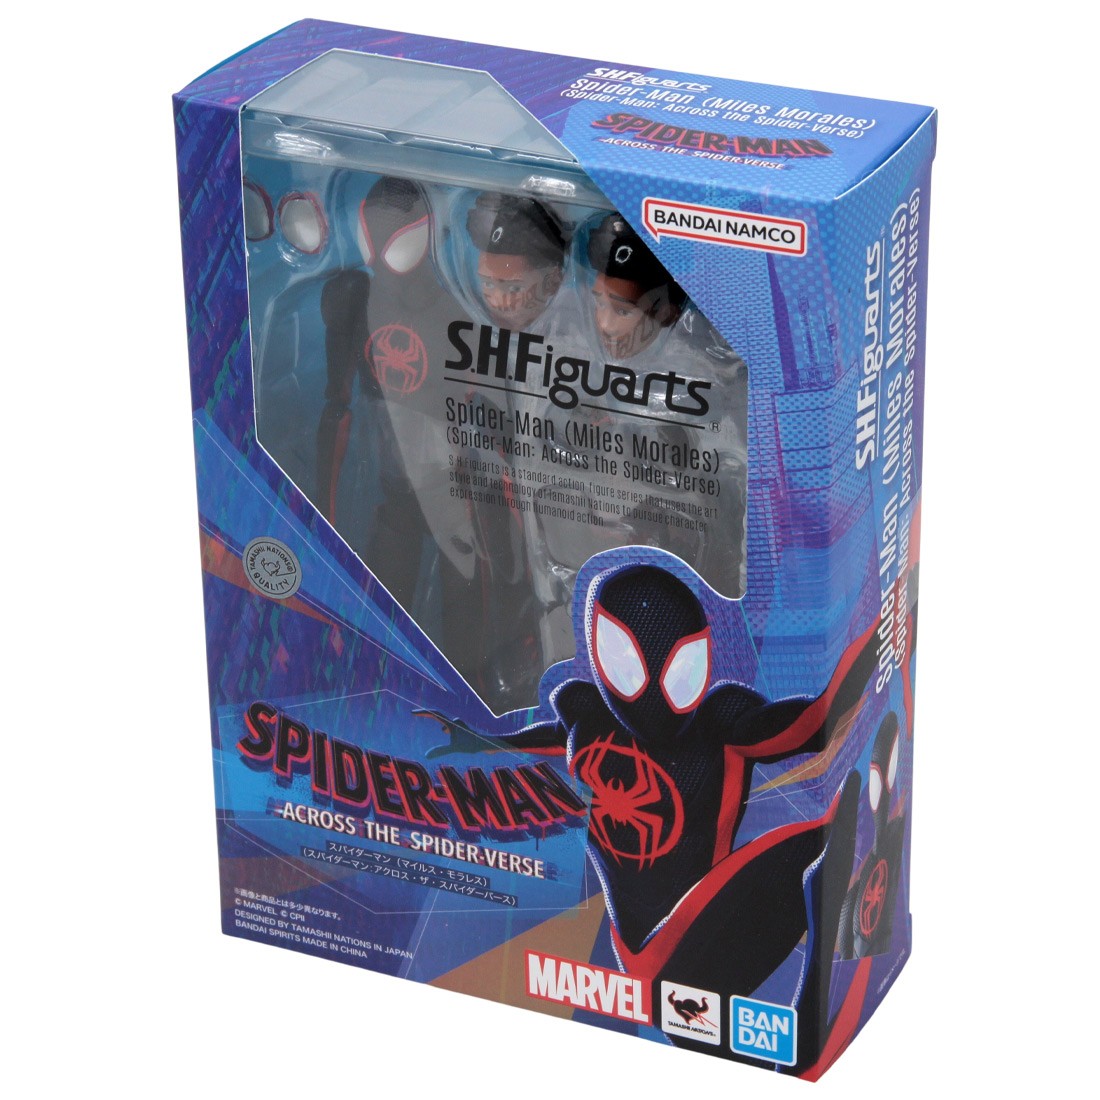 S.H.Figuarts Spider-Man (Miles Morales) (Spider-Man:Across the Spiderverse)